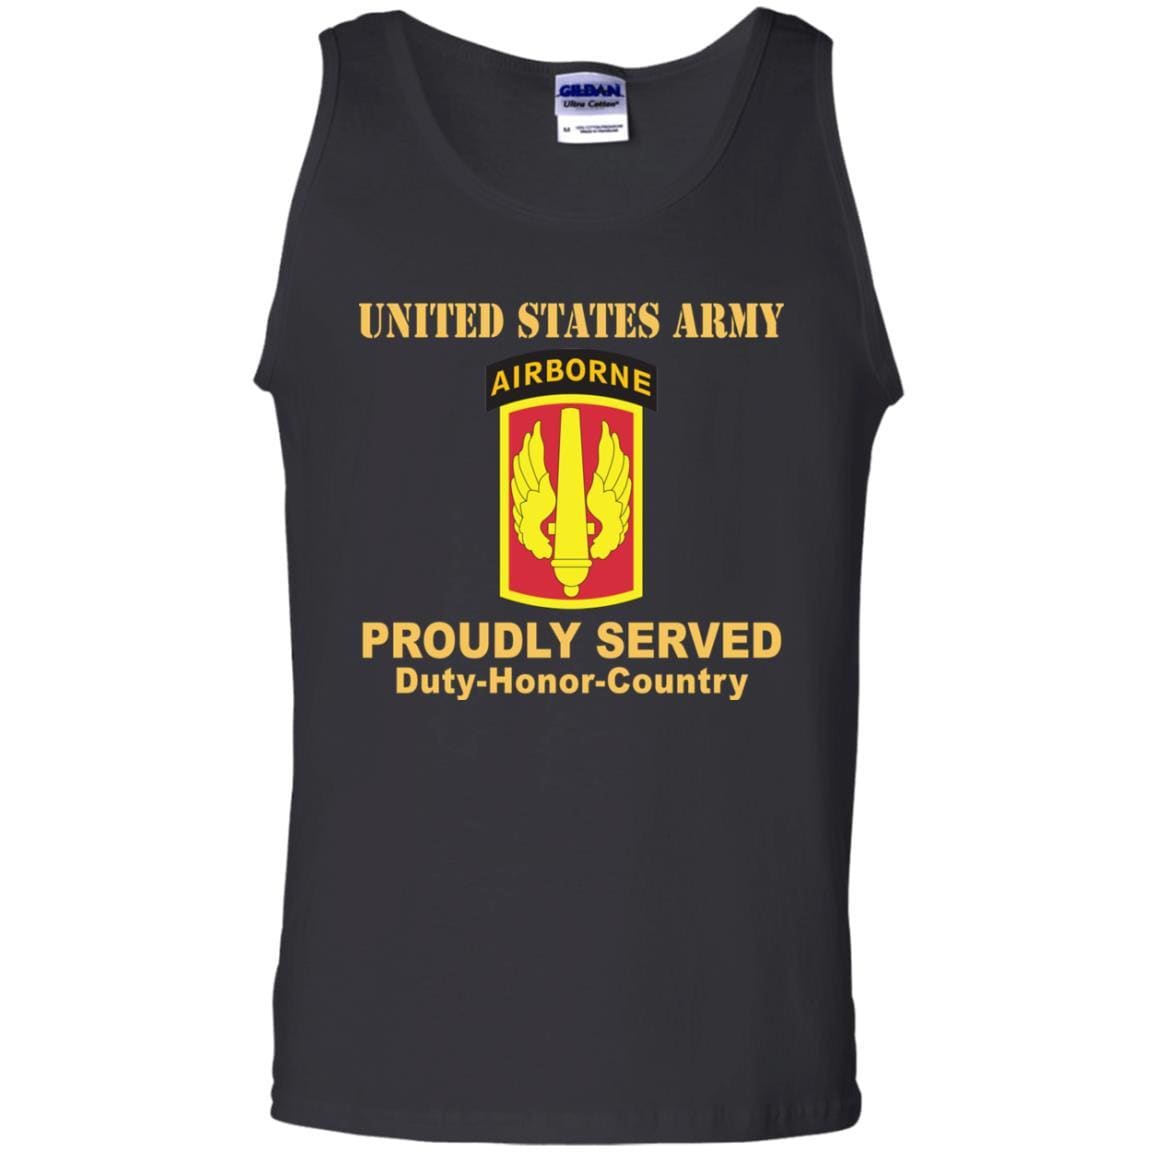 US ARMY 18TH FIELD ARTILLERY WITH AIRBORNE TAB- Proudly Served T-Shirt On Front For Men-TShirt-Army-Veterans Nation